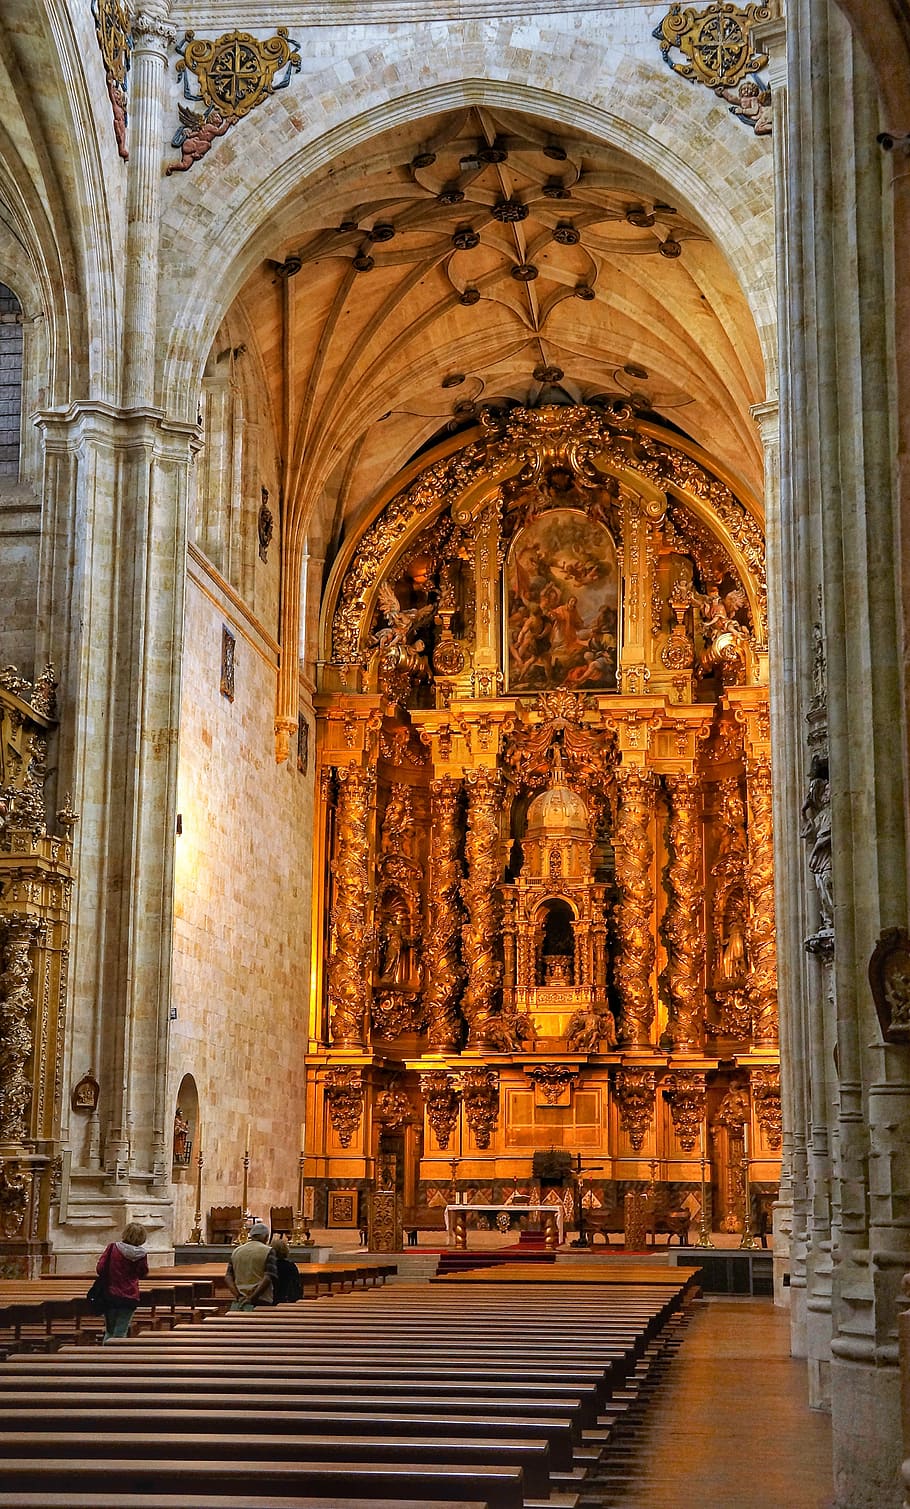 catholic, church, interior, alter, spain, architecture, built structure, place of worship, religion, arch